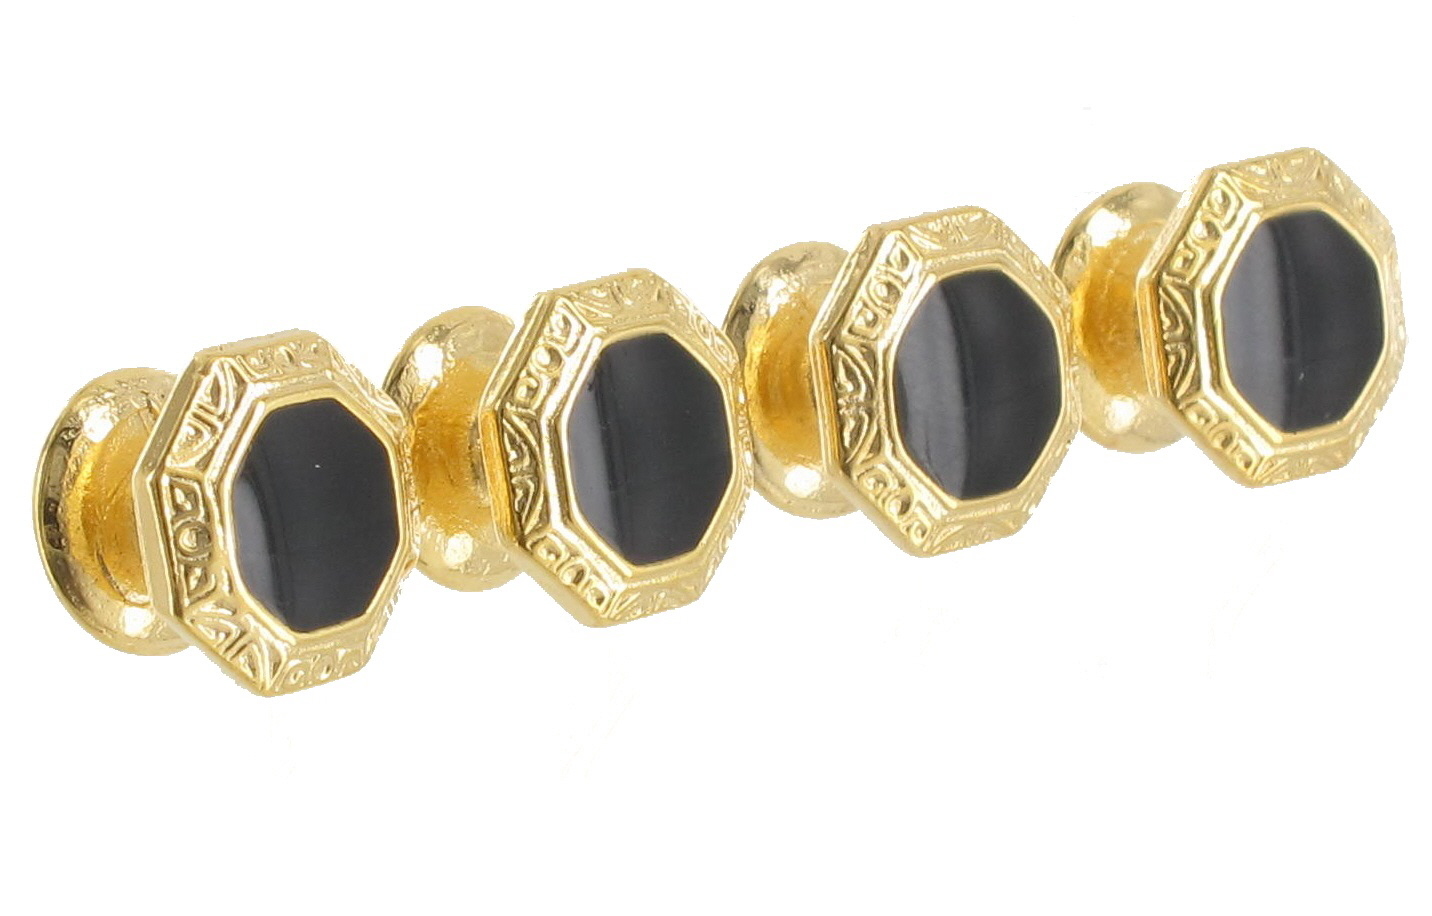 Shirt Studs Octagon Etched Black Gold Tone Push Through Buttons Mens 9.5mm